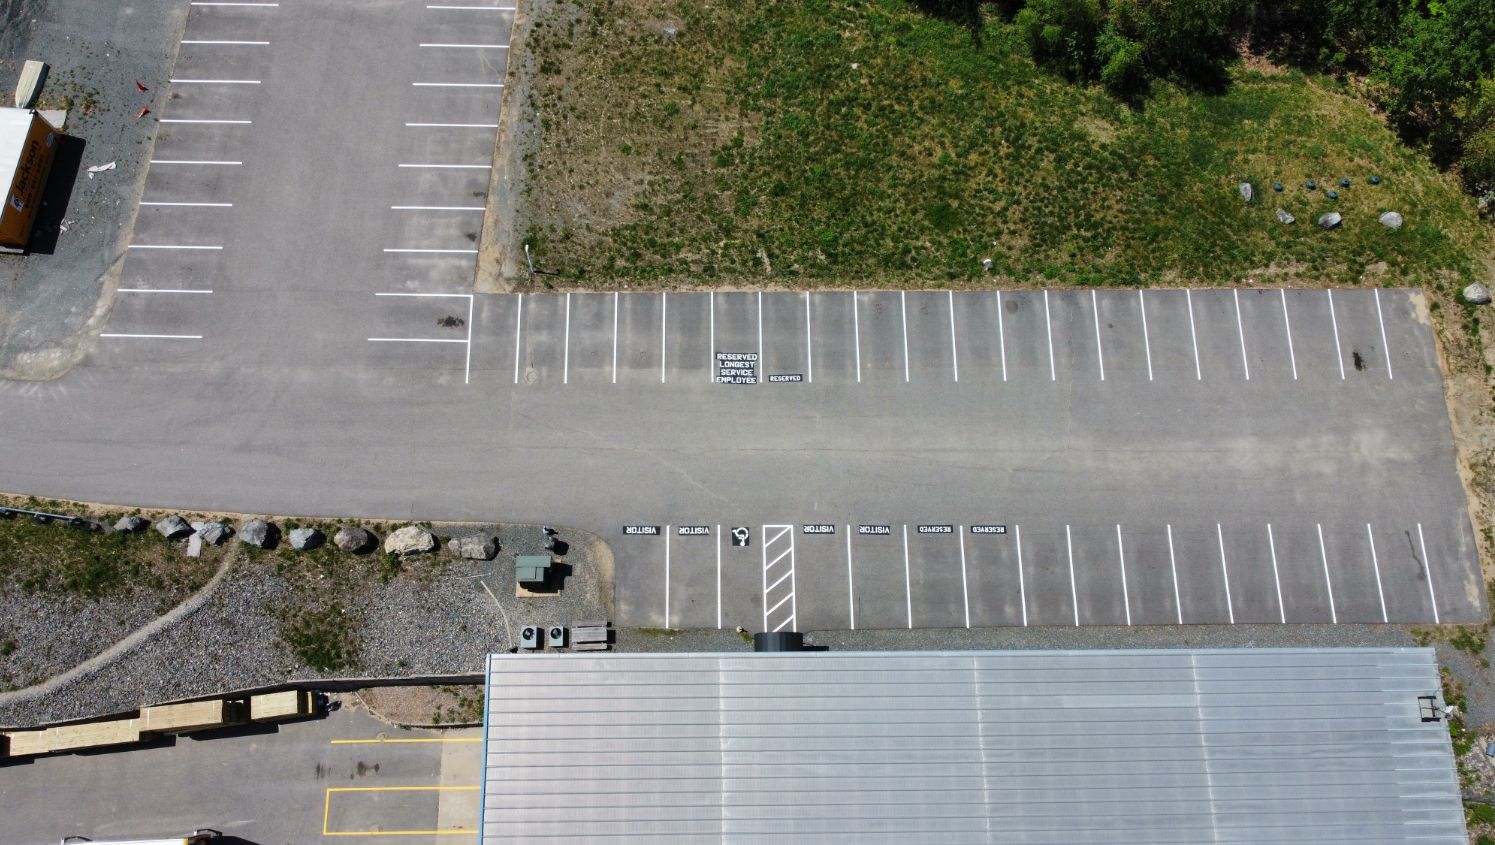 an aerial view of customer parking spaces